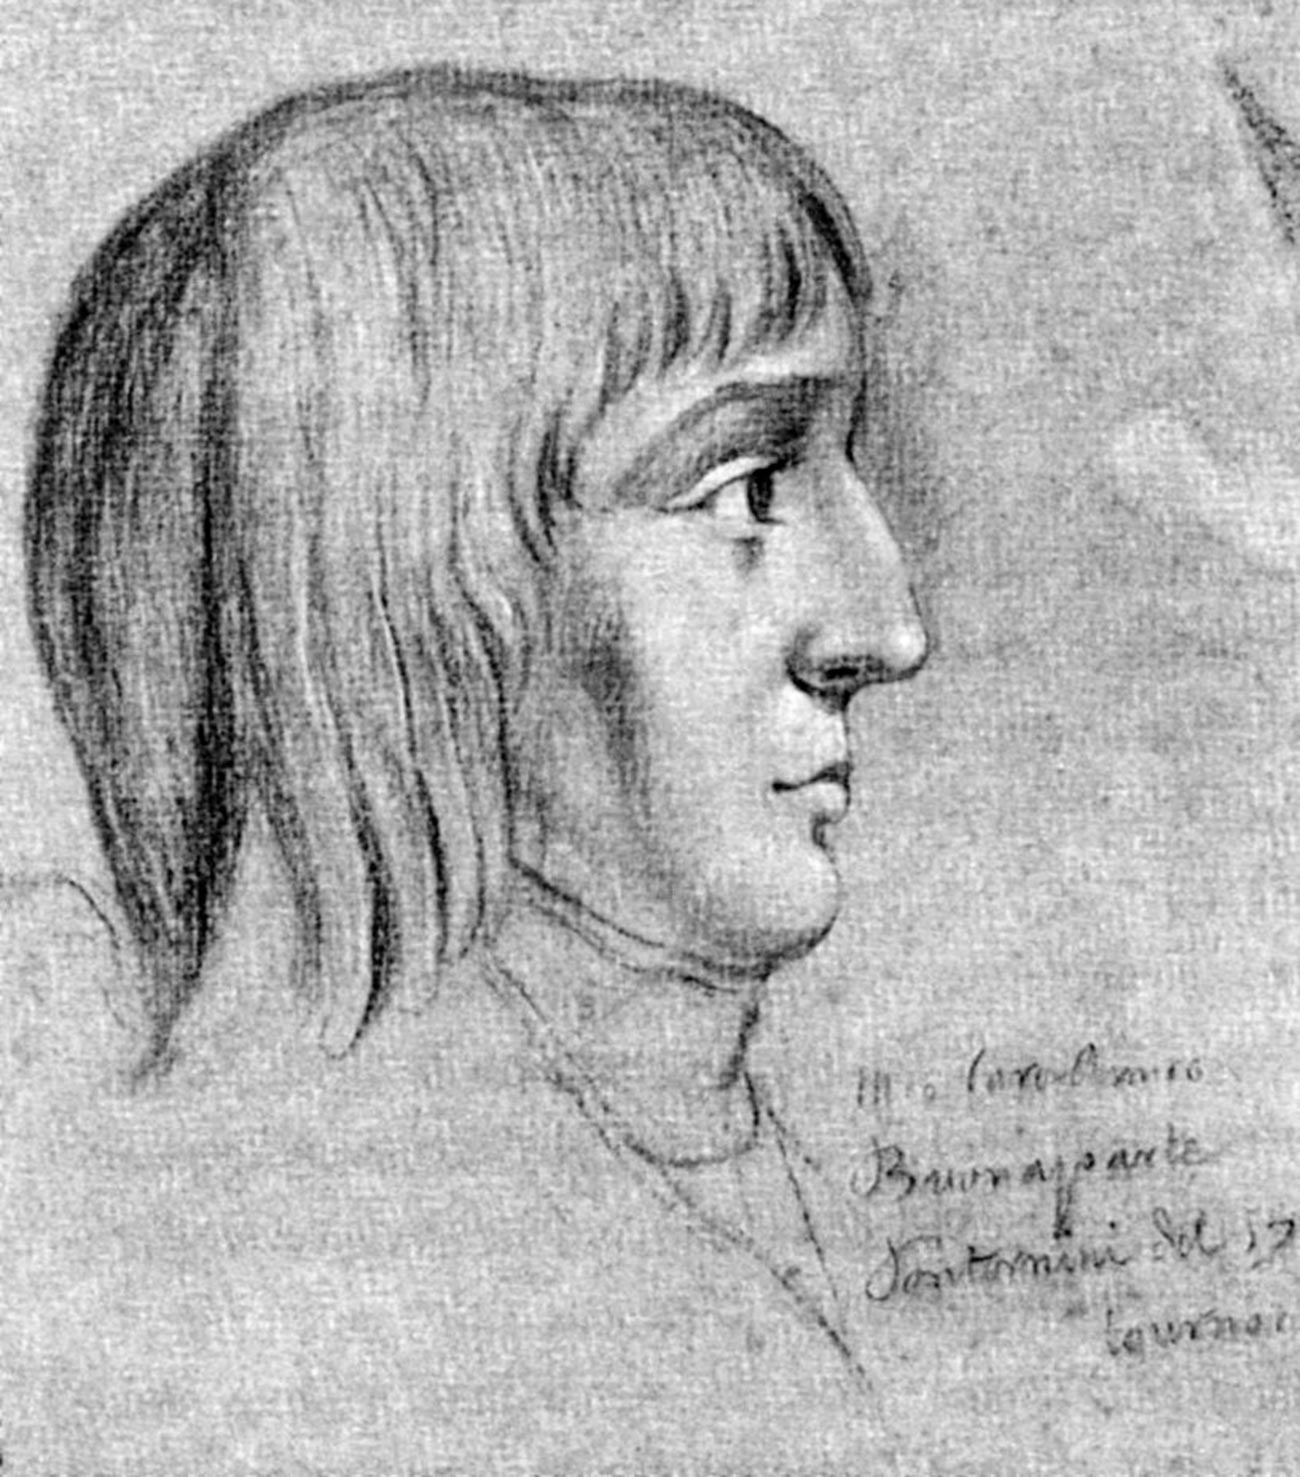 Napoleon Bonaparte (1769-1821) at the age of 16 years (pencil with white on paper), counterfeit.